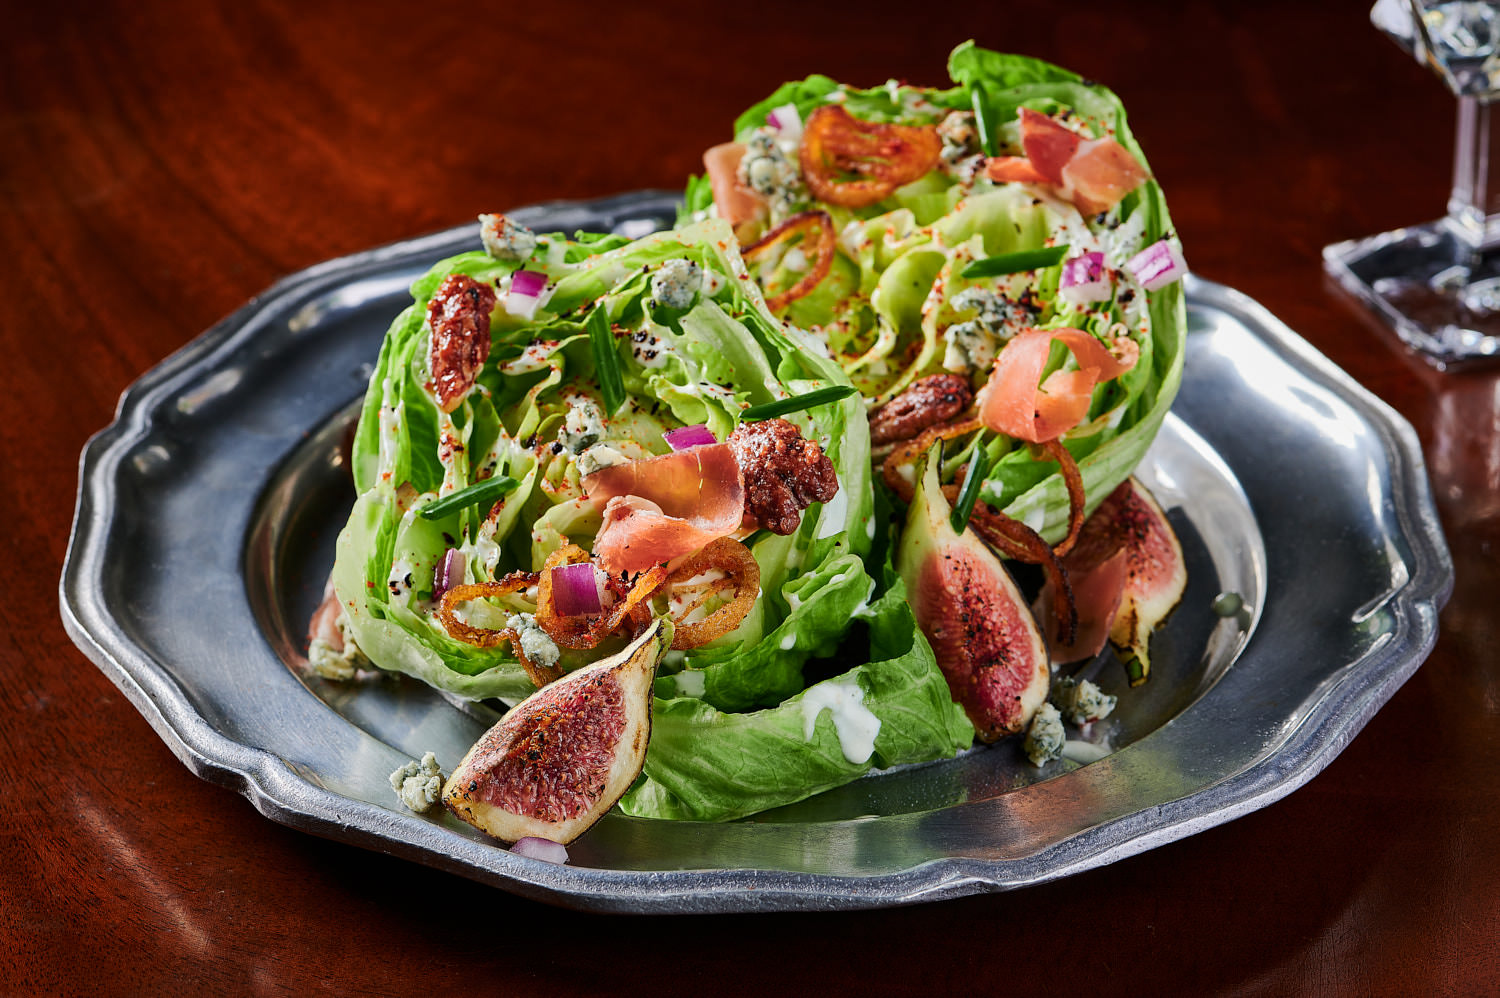 Editorial Cookbook Food Photography of Wedge Salad